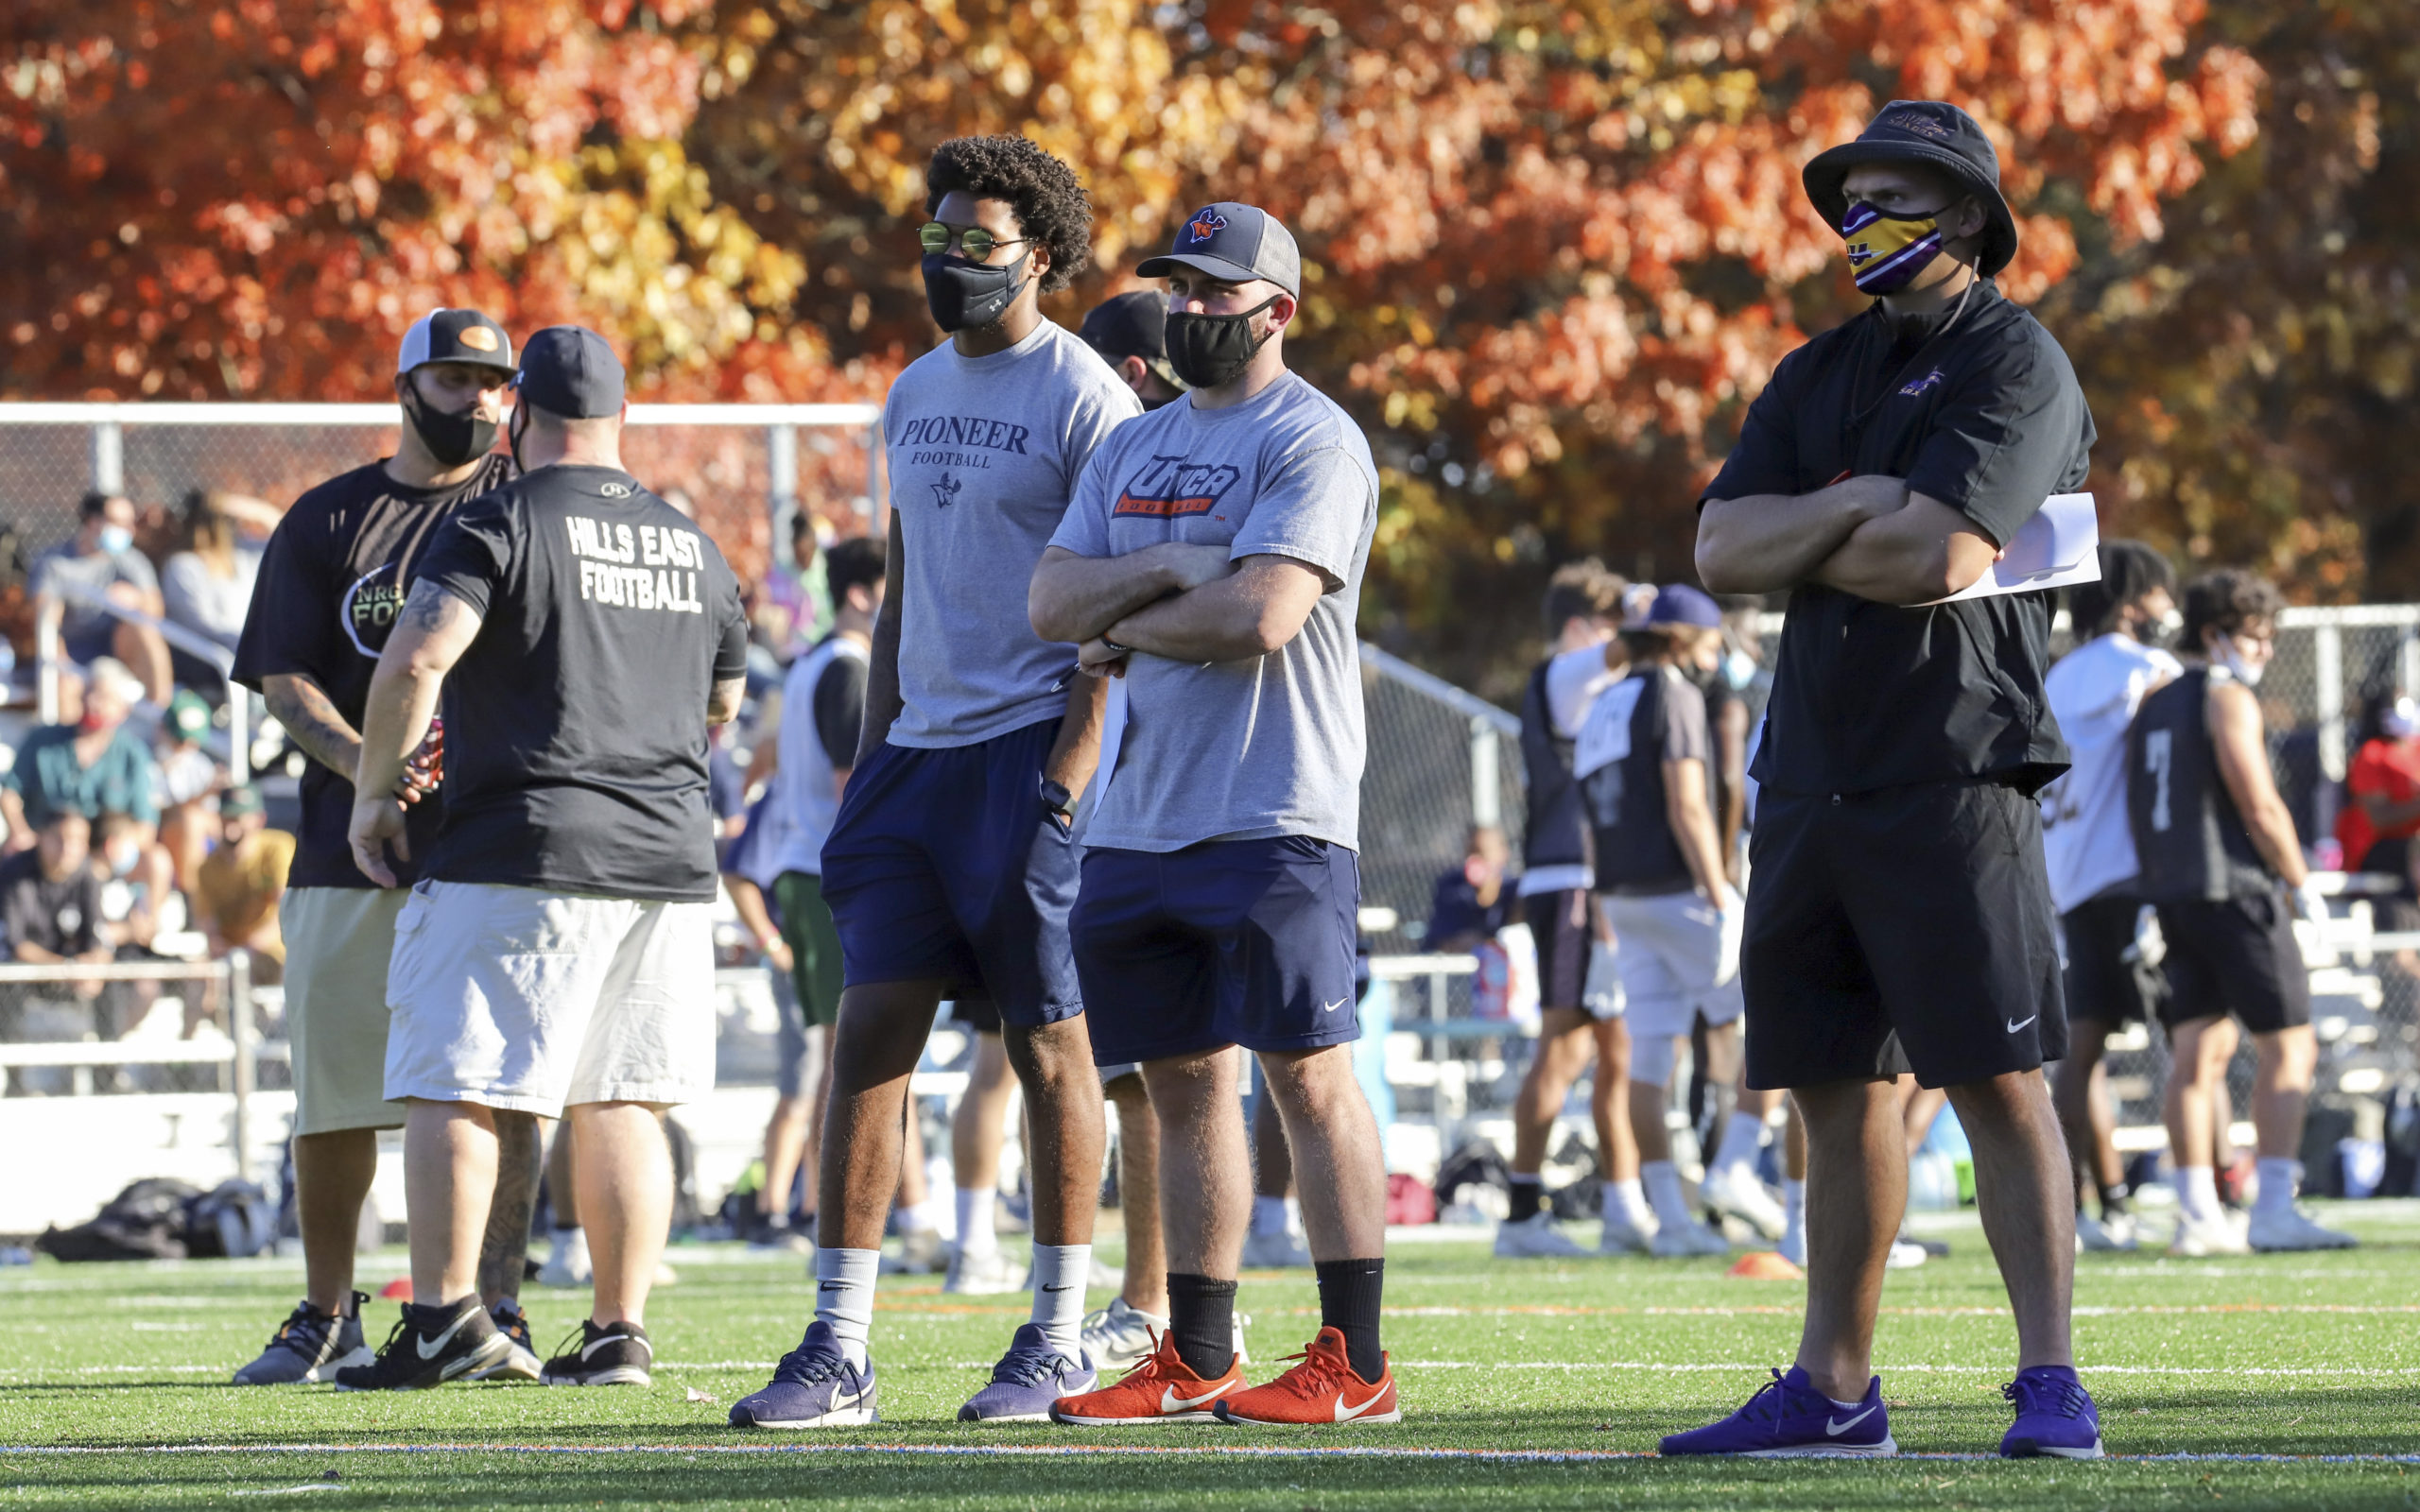 Utica College coaches Nick Woodman, the assistant coach, and Antonio Scala, the assistant coach of linebackers, and Alfred University special teams coordinator and defensive backs coach Holden Whitehead scout players during the Suffolk County Football Coaches Association's seventh annual showcase November 8.   CHRISTINE HEEREN